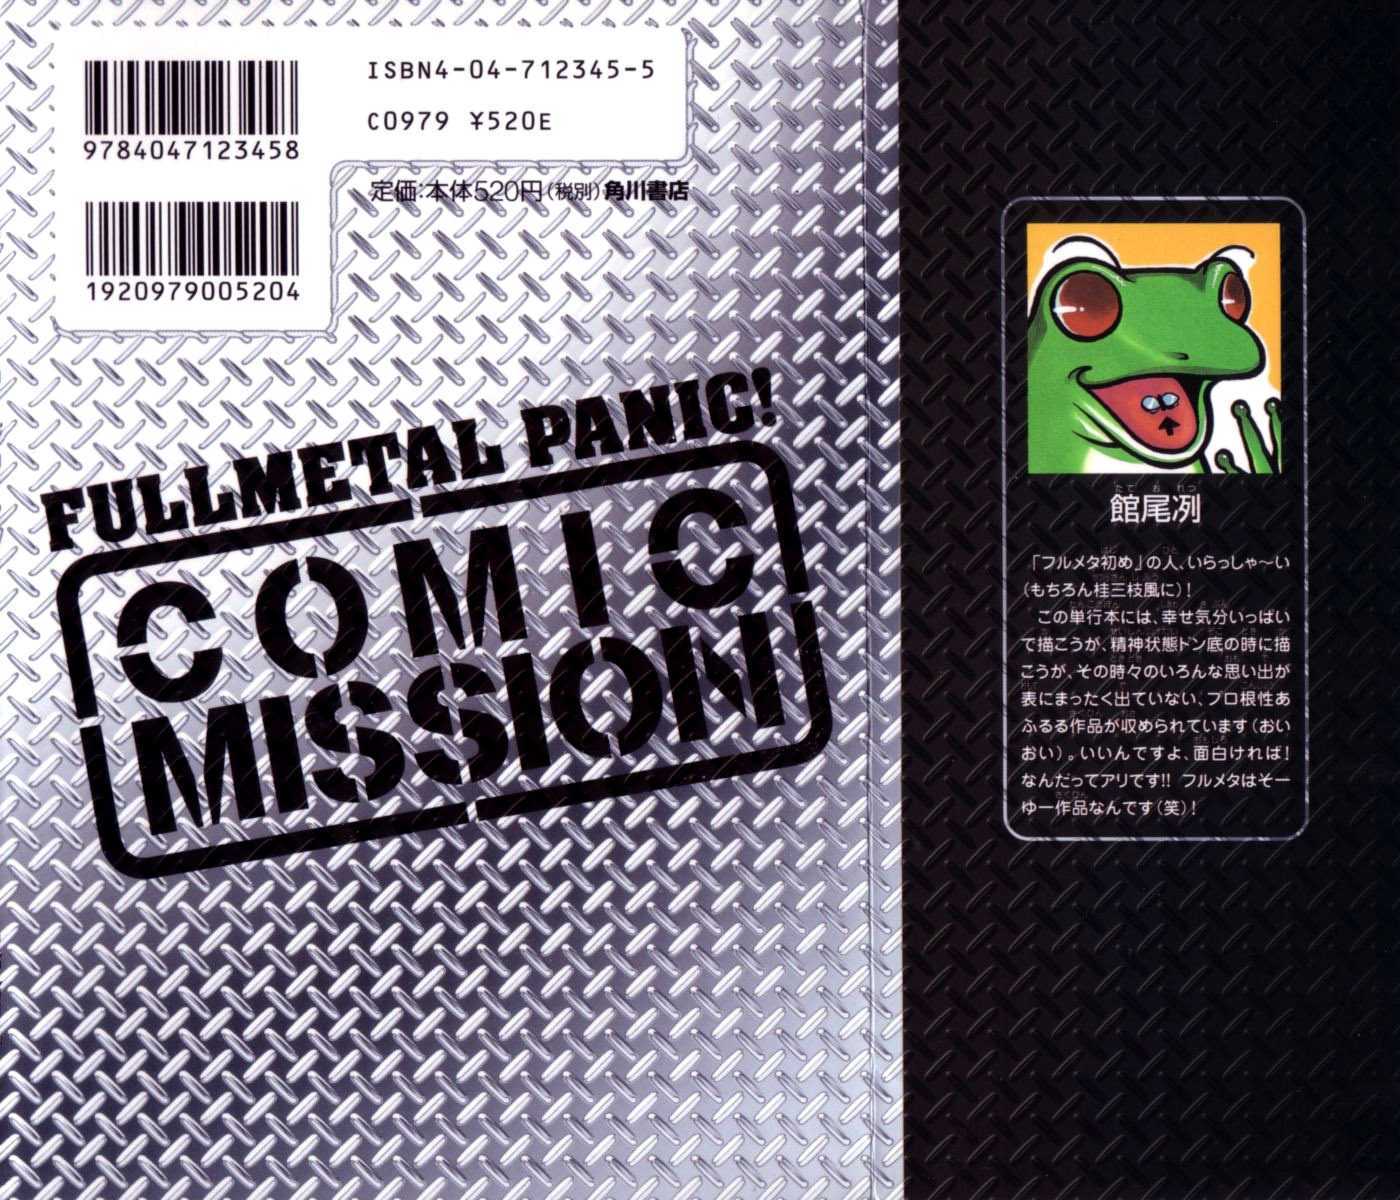 Full Metal Panic! Comic Mission Vol.1 Chapter 5.5 : [Extra Mission] Cinderella Panic! - Picture 2